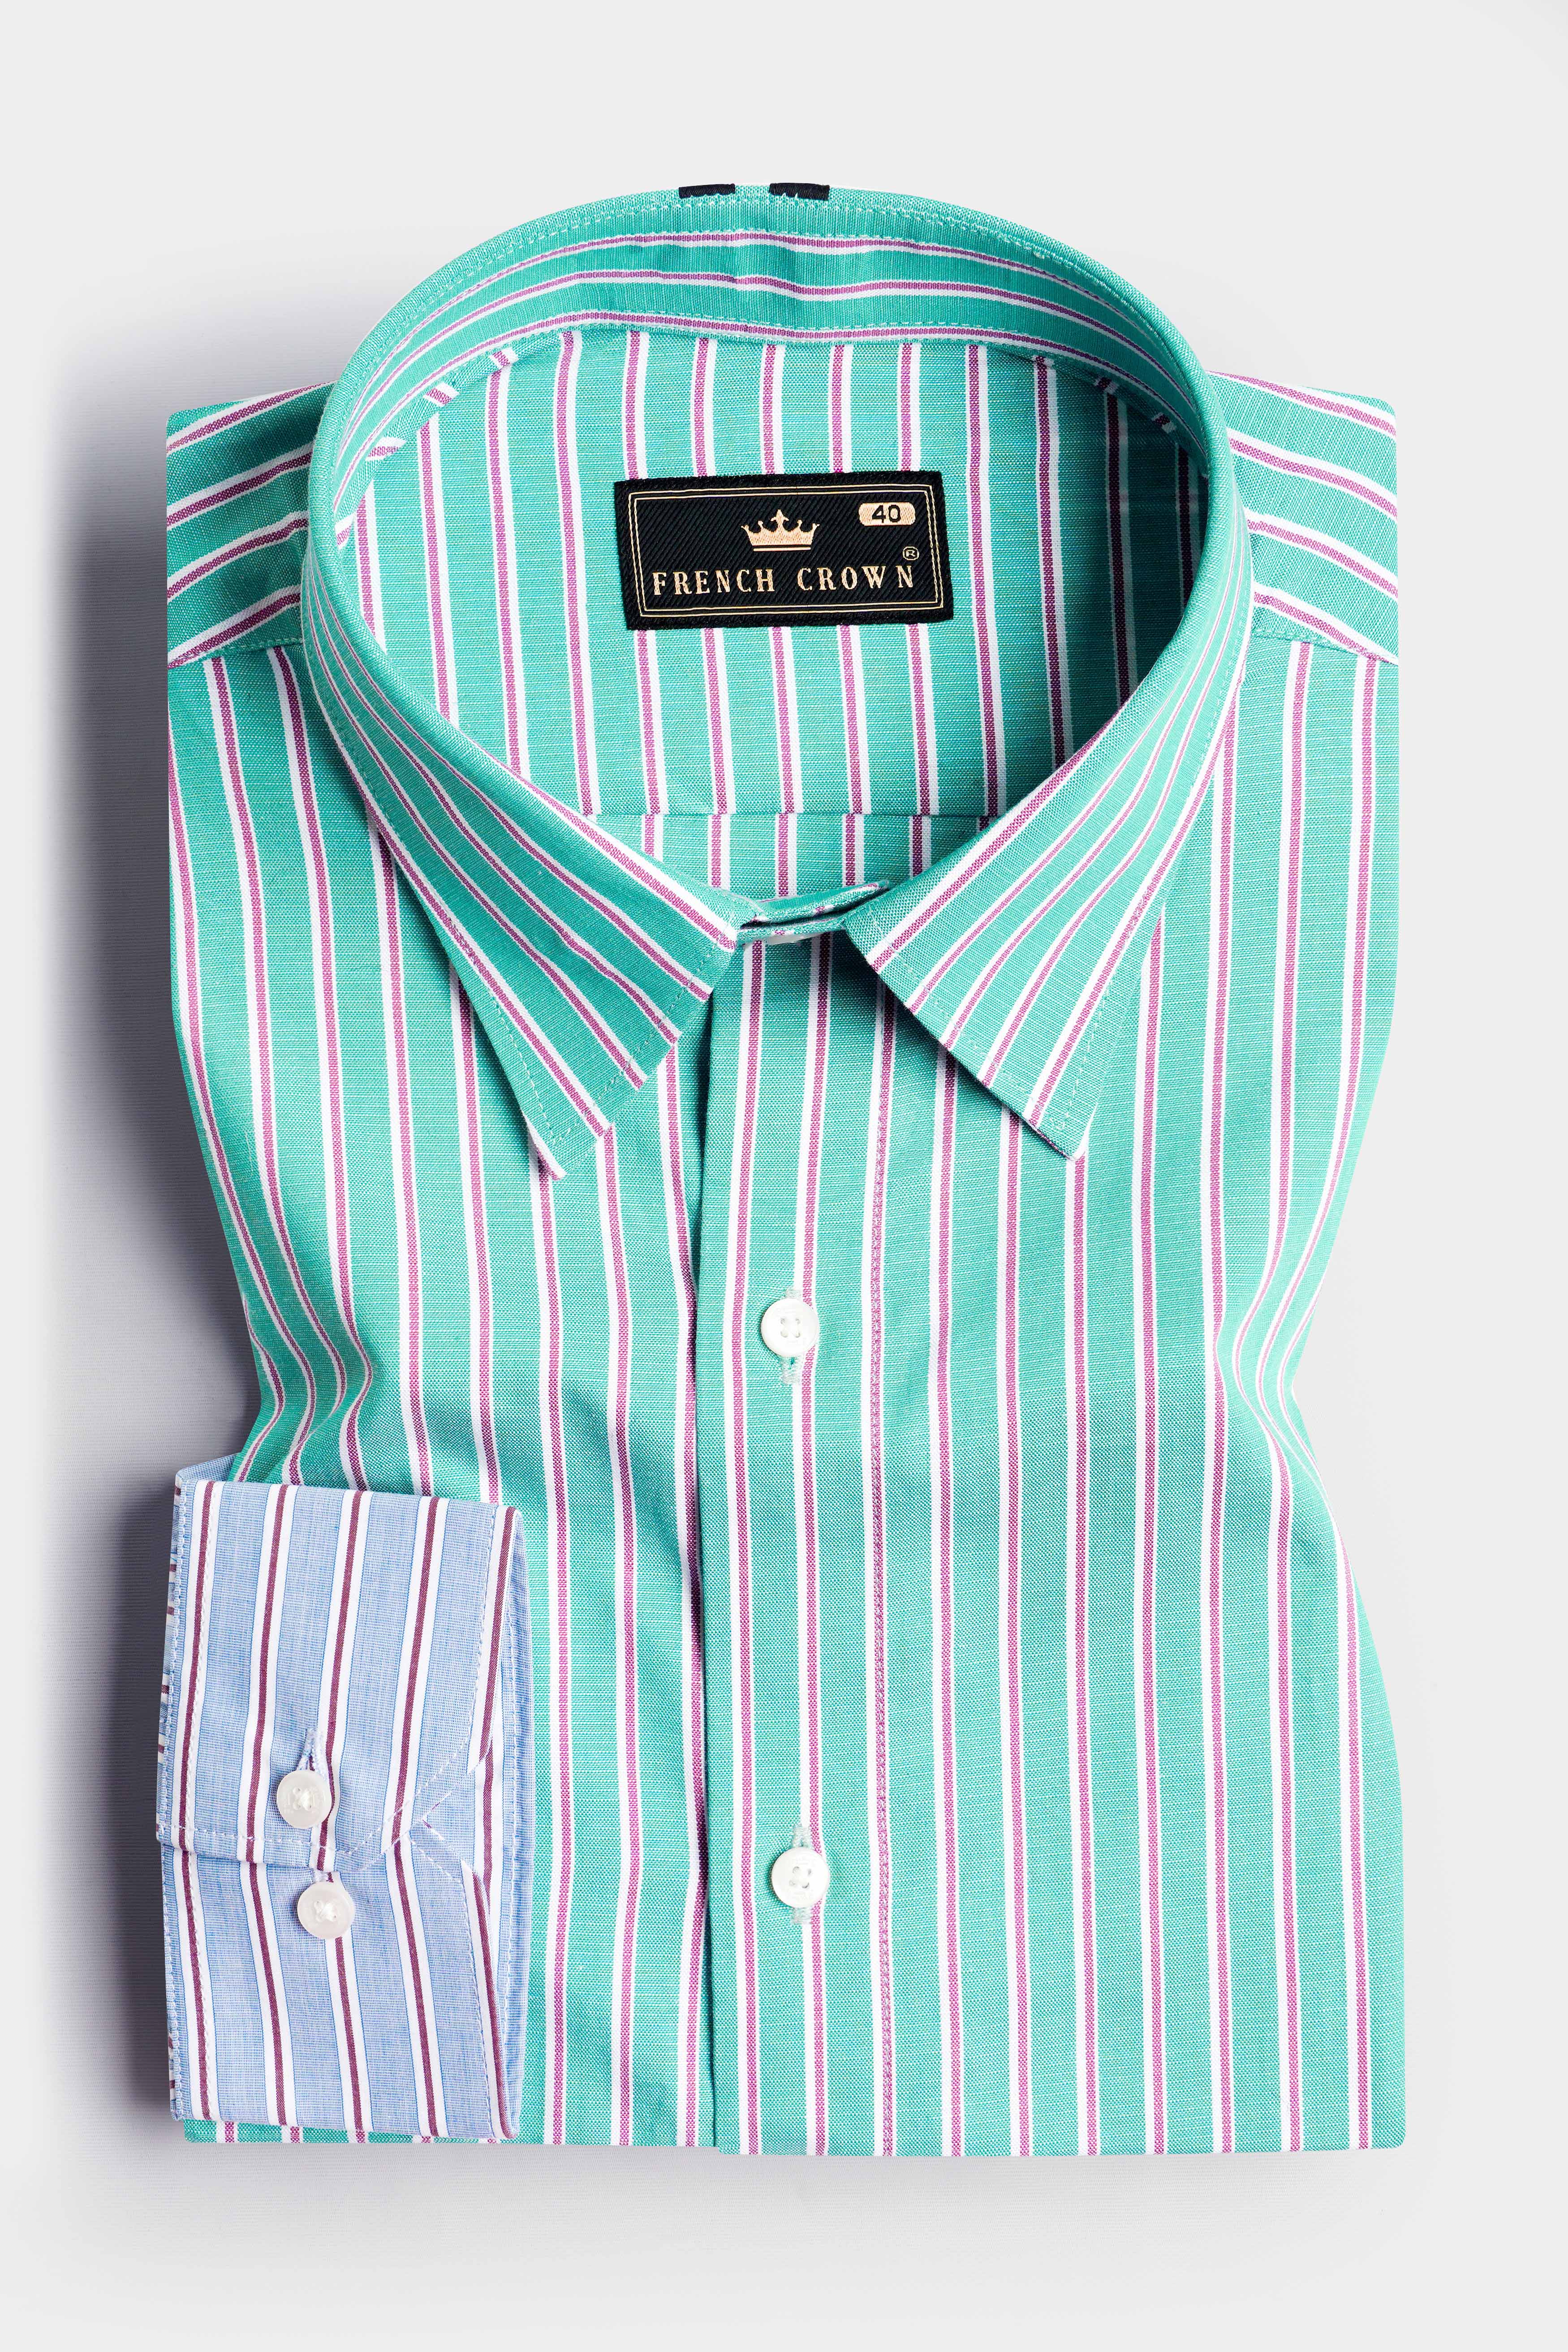 Downy Green and Periwinkle Blue Striped Premium Cotton Designer Shirt 11578-P467-38, 11578-P467-H-38, 11578-P467-39, 11578-P467-H-39, 11578-P467-40, 11578-P467-H-40, 11578-P467-42, 11578-P467-H-42, 11578-P467-44, 11578-P467-H-44, 11578-P467-46, 11578-P467-H-46, 11578-P467-48, 11578-P467-H-48, 11578-P467-50, 11578-P467-H-50, 11578-P467-52, 11578-P467-H-52